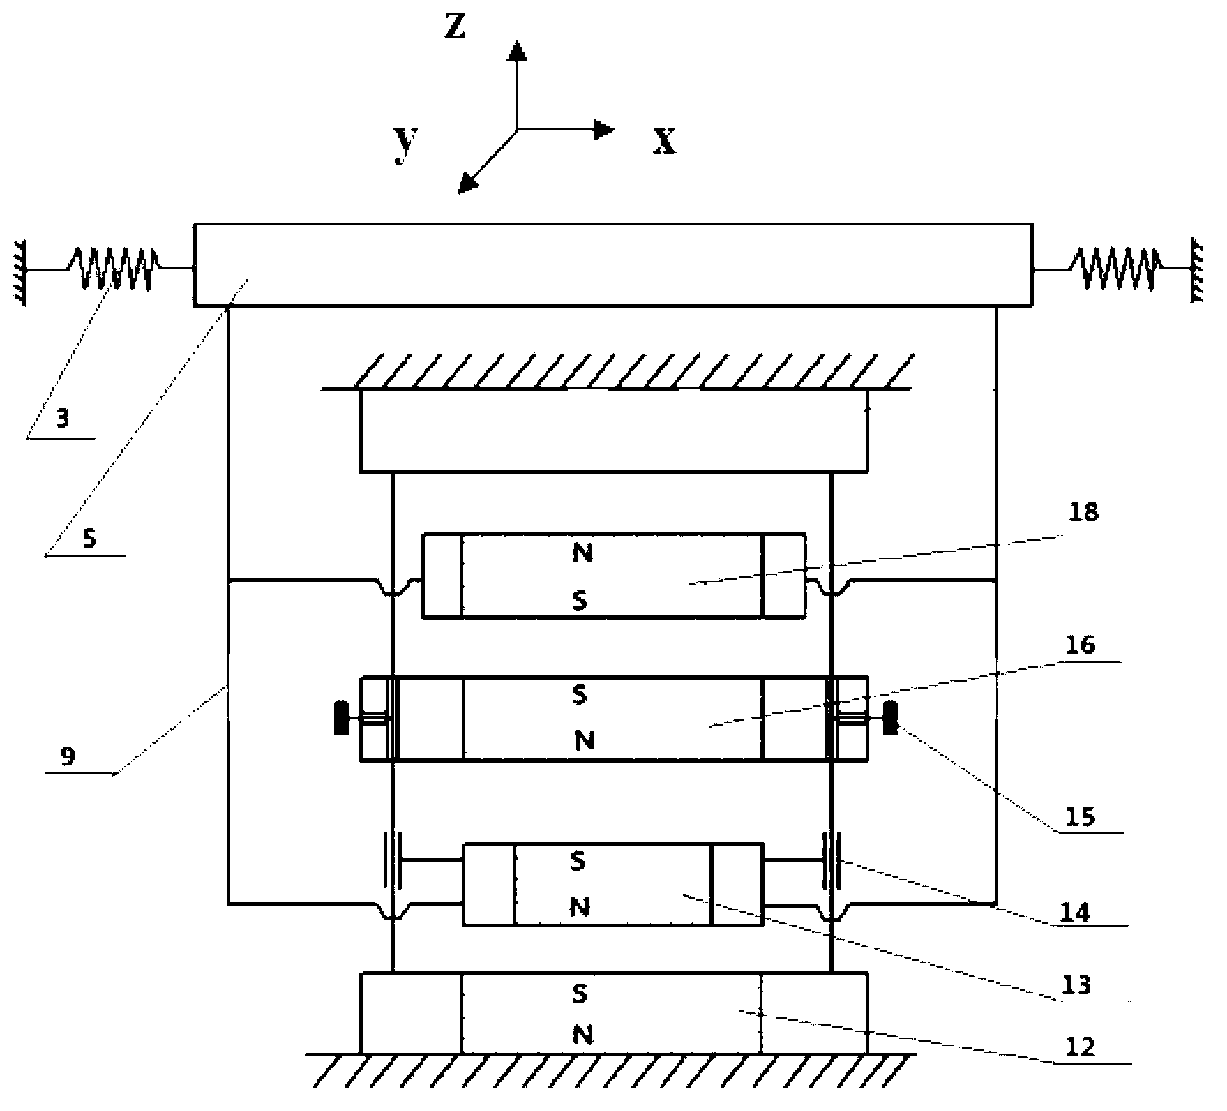 Three-degree-of-freedom ultralow frequency vibration absorber